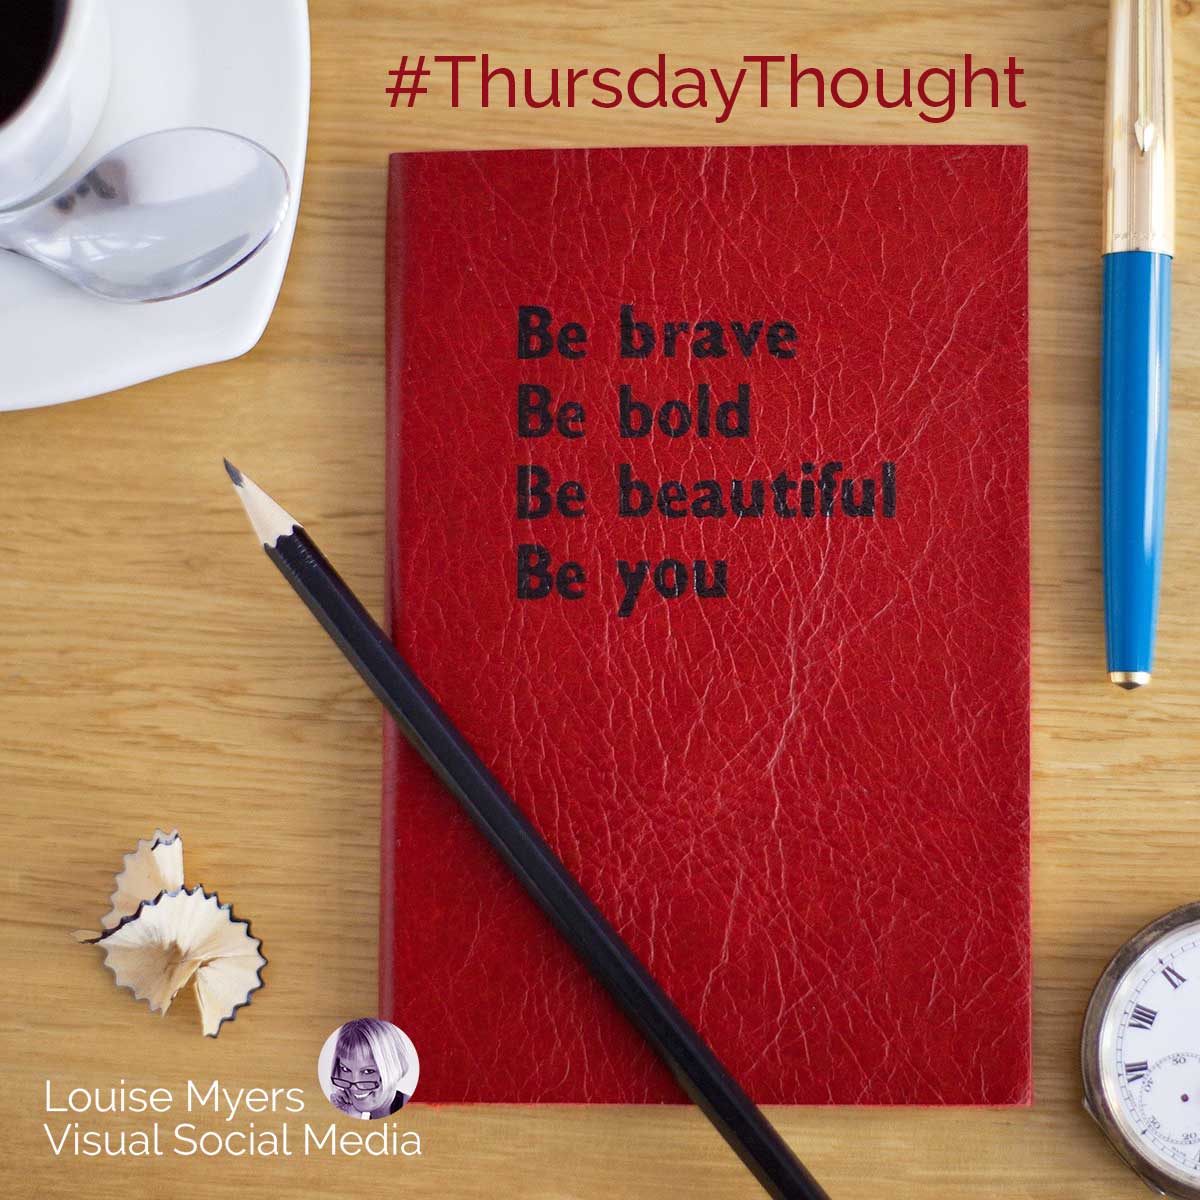 red journal on desk says be bold be brave be beautiful thursday thought.